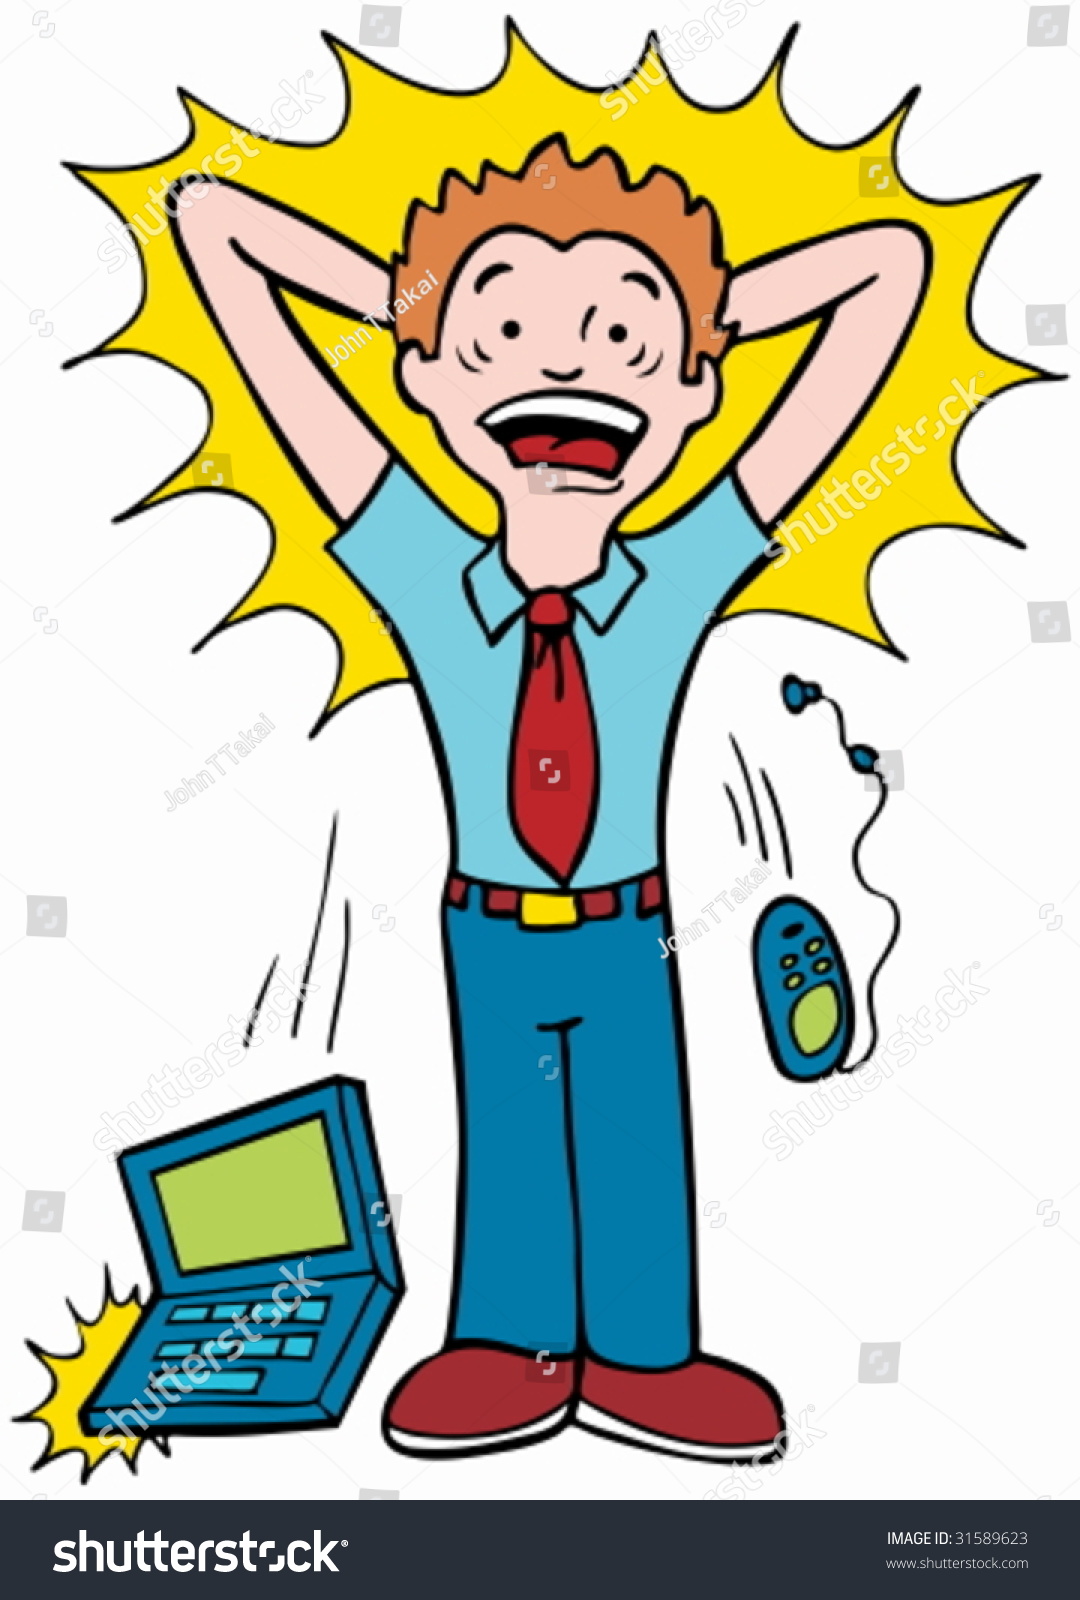 stressed employee clipart - photo #37